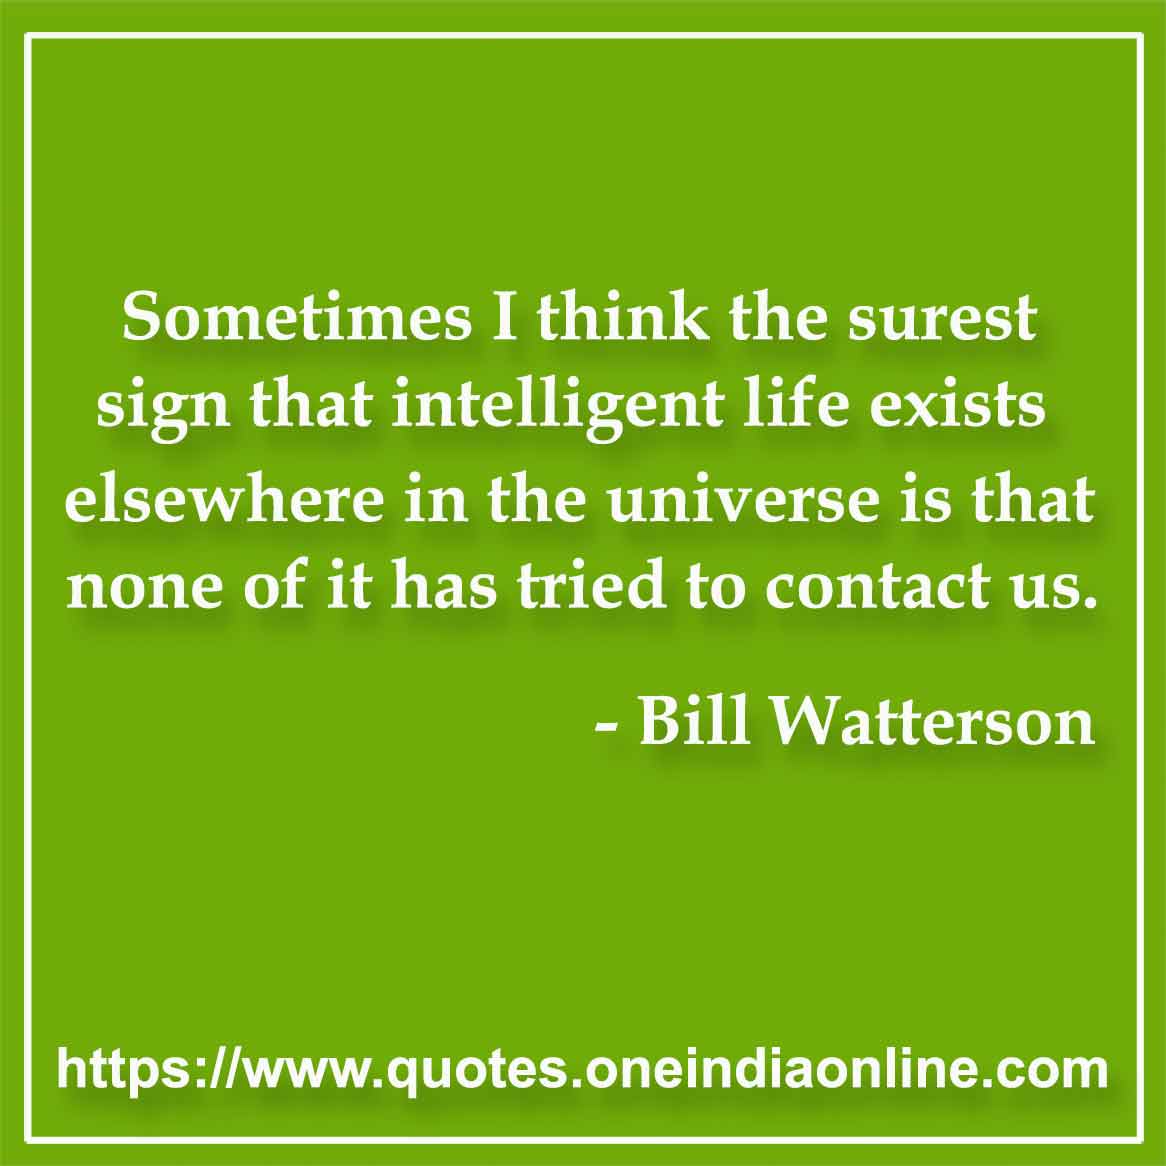 Sometimes I think the surest sign that intelligent life exists elsewhere in the universe is that none of it has tried to contact us.

- Intelligent Quotes by Bill Watterson